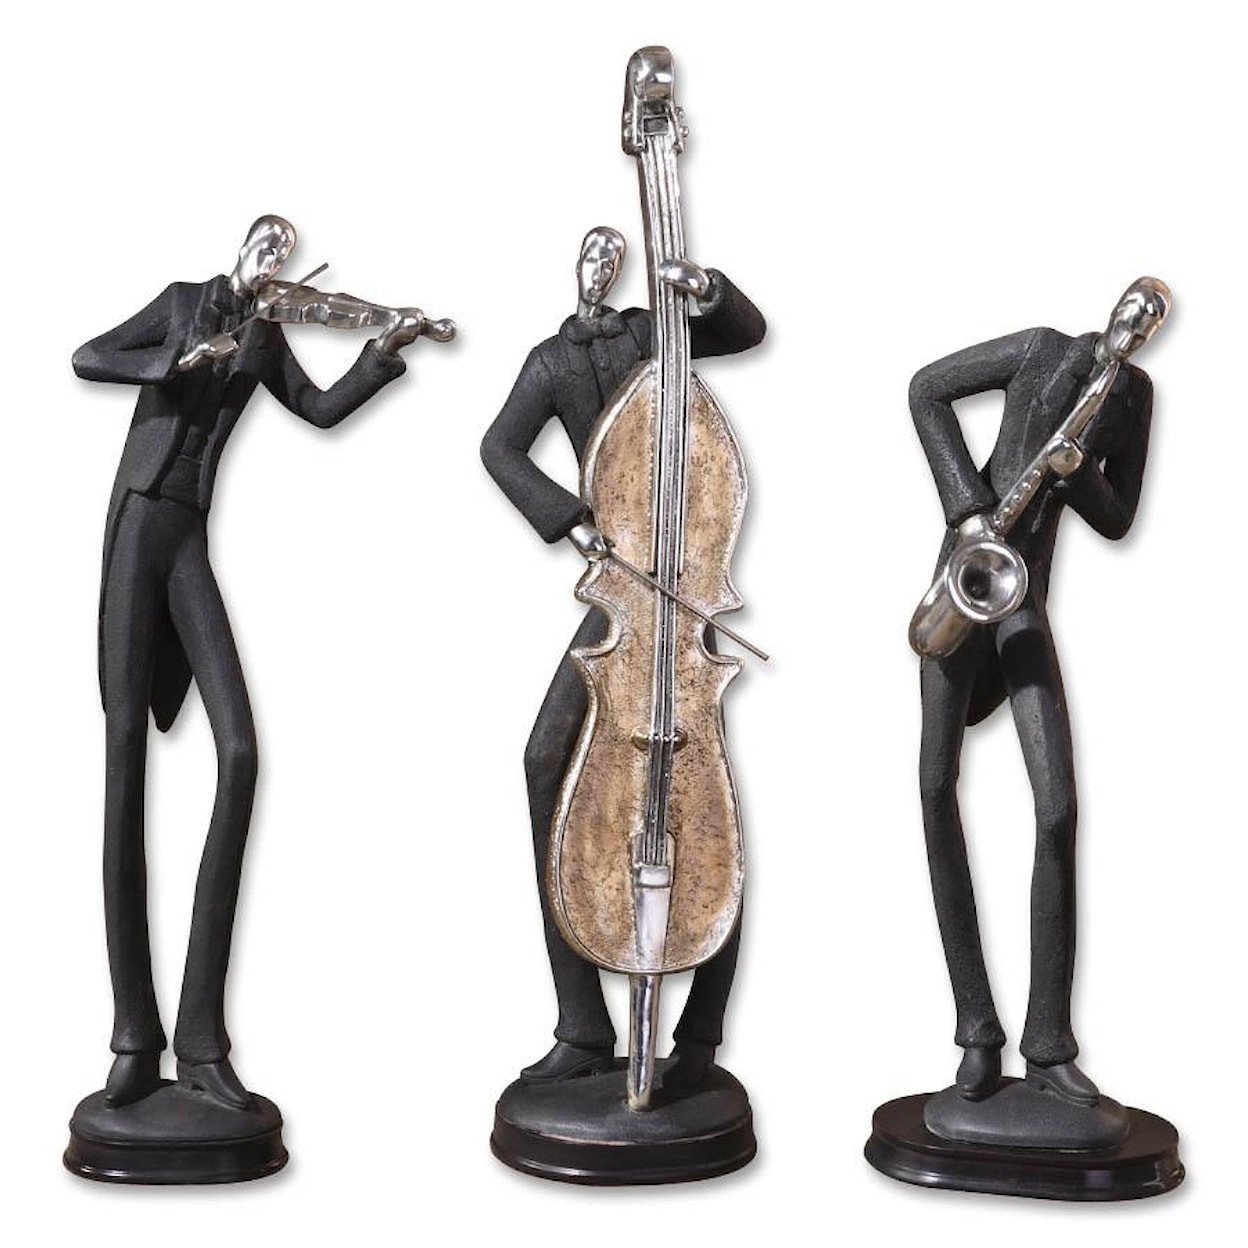 Uttermost Accessories - Statues and Figurines Musicians Accessories Set of 3